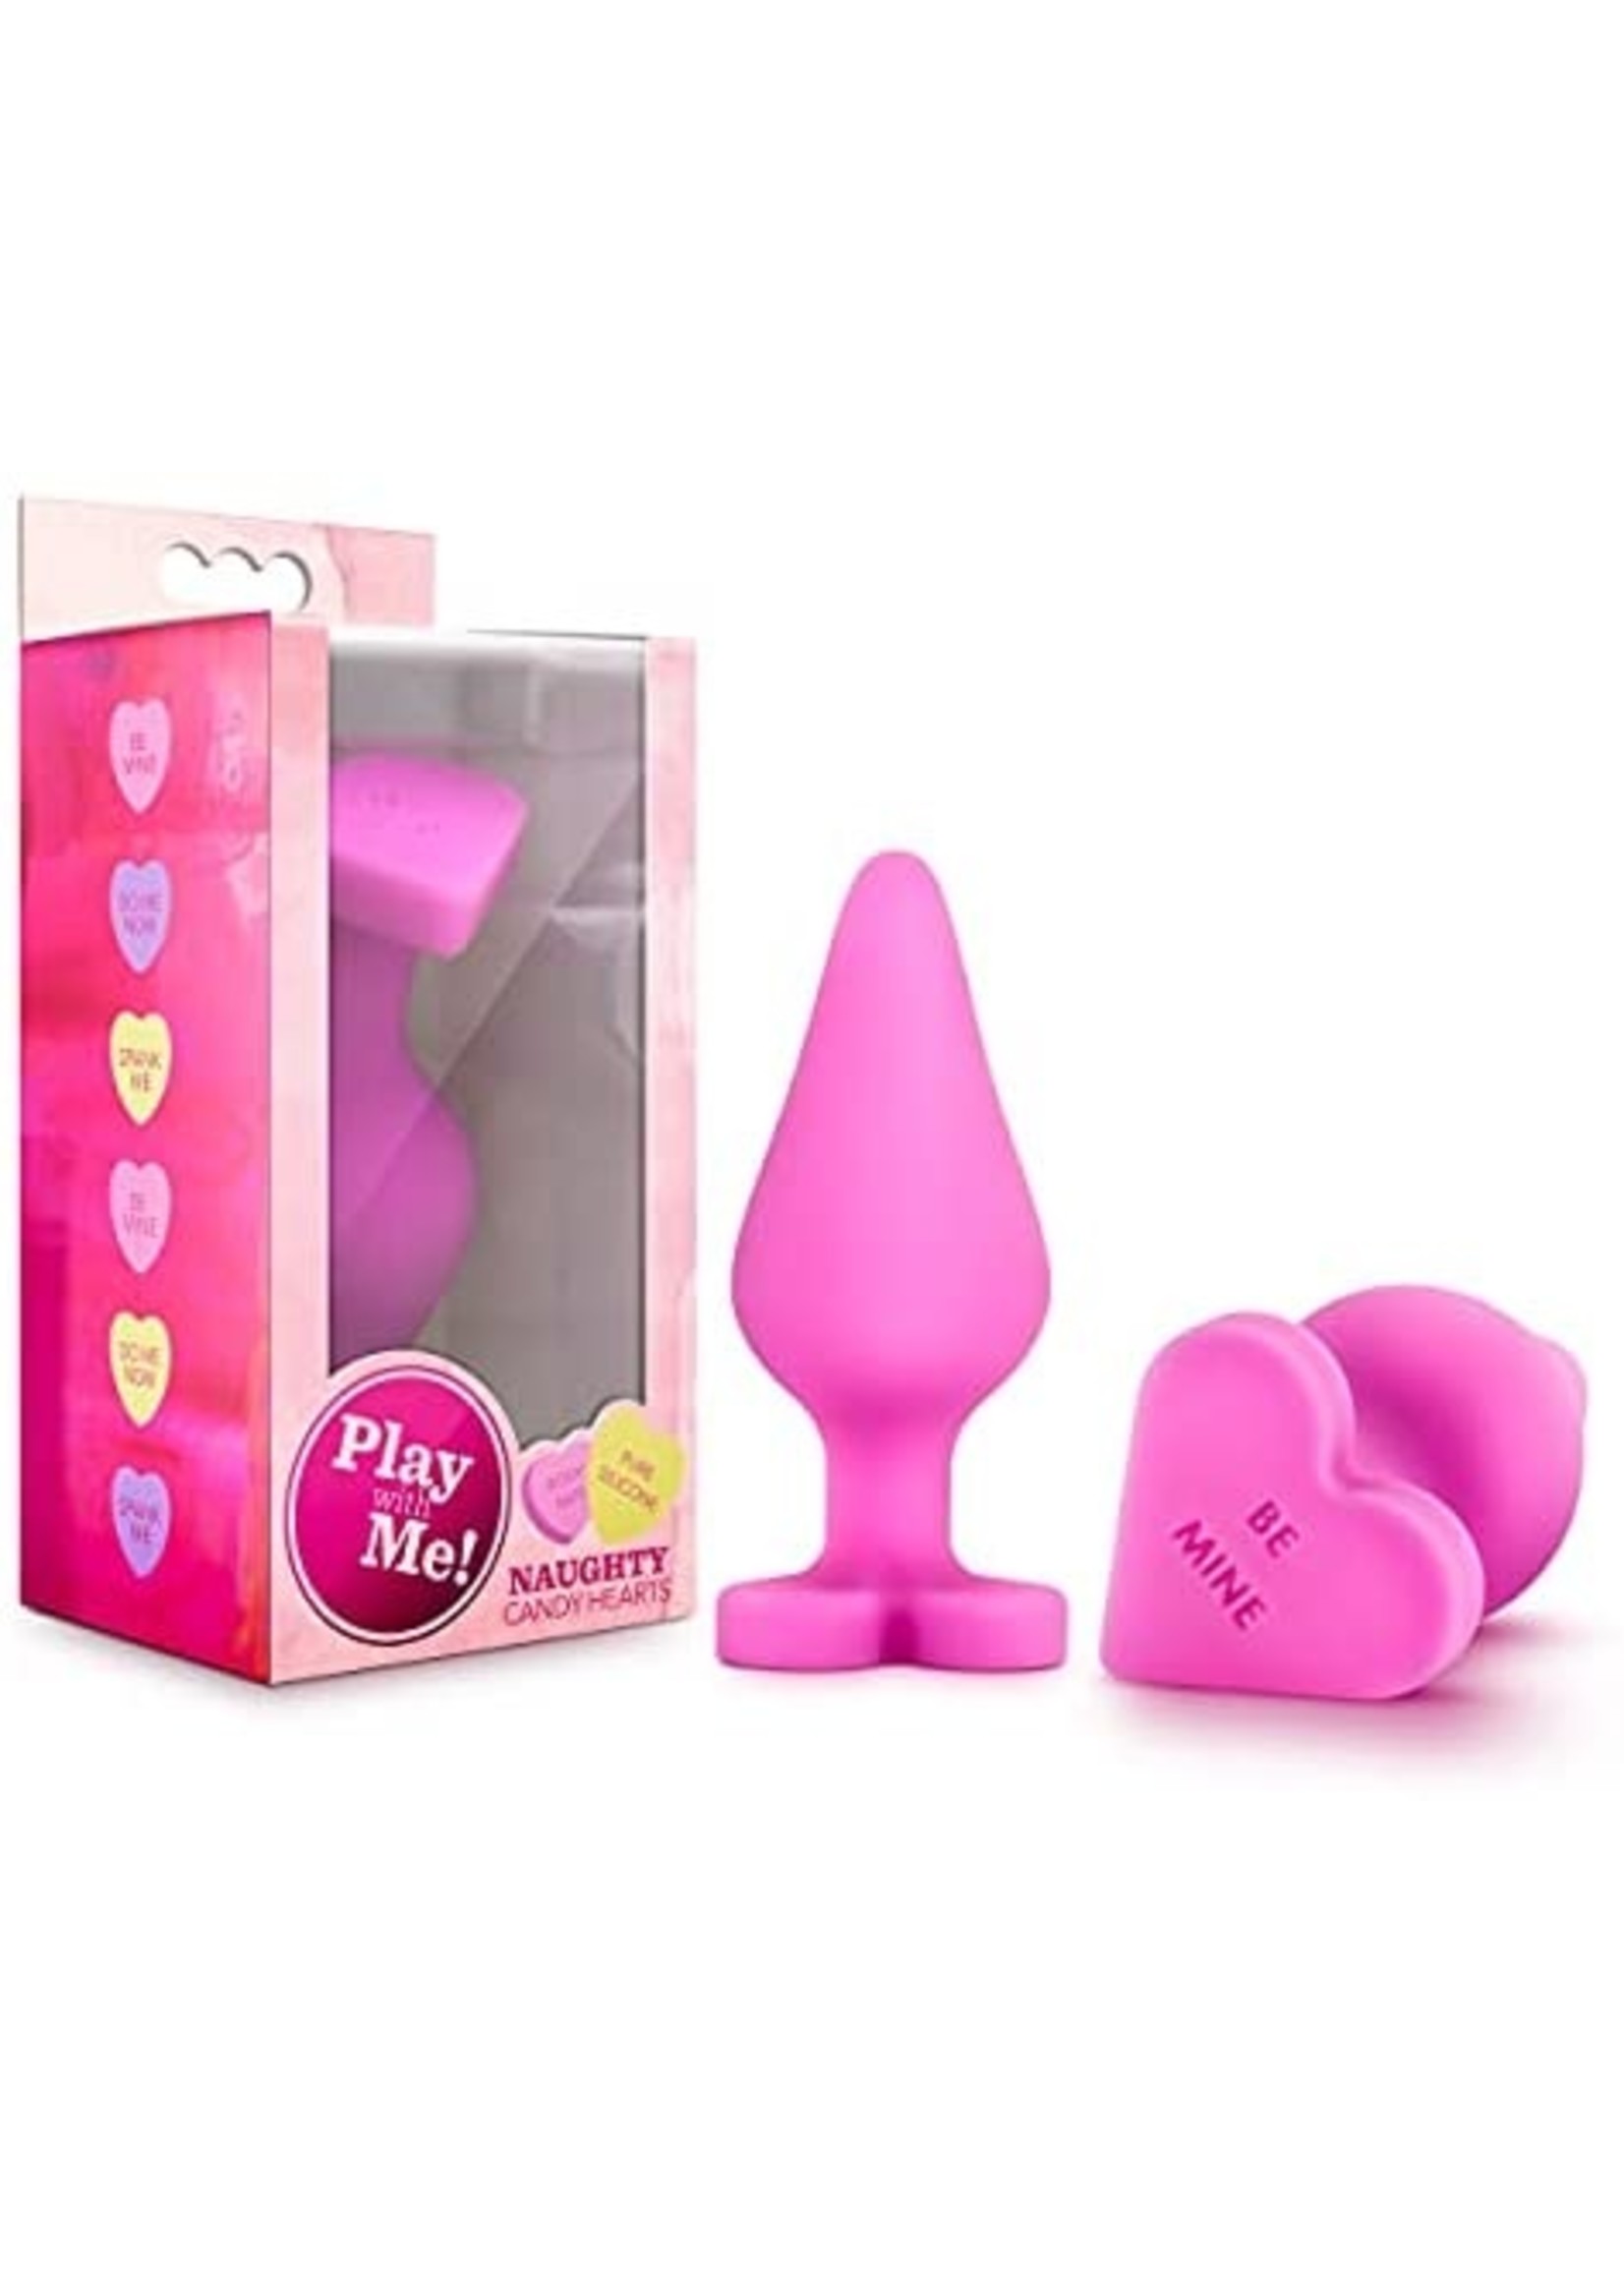 Play with Me Naughty Candy  Silicone Butt Plugs